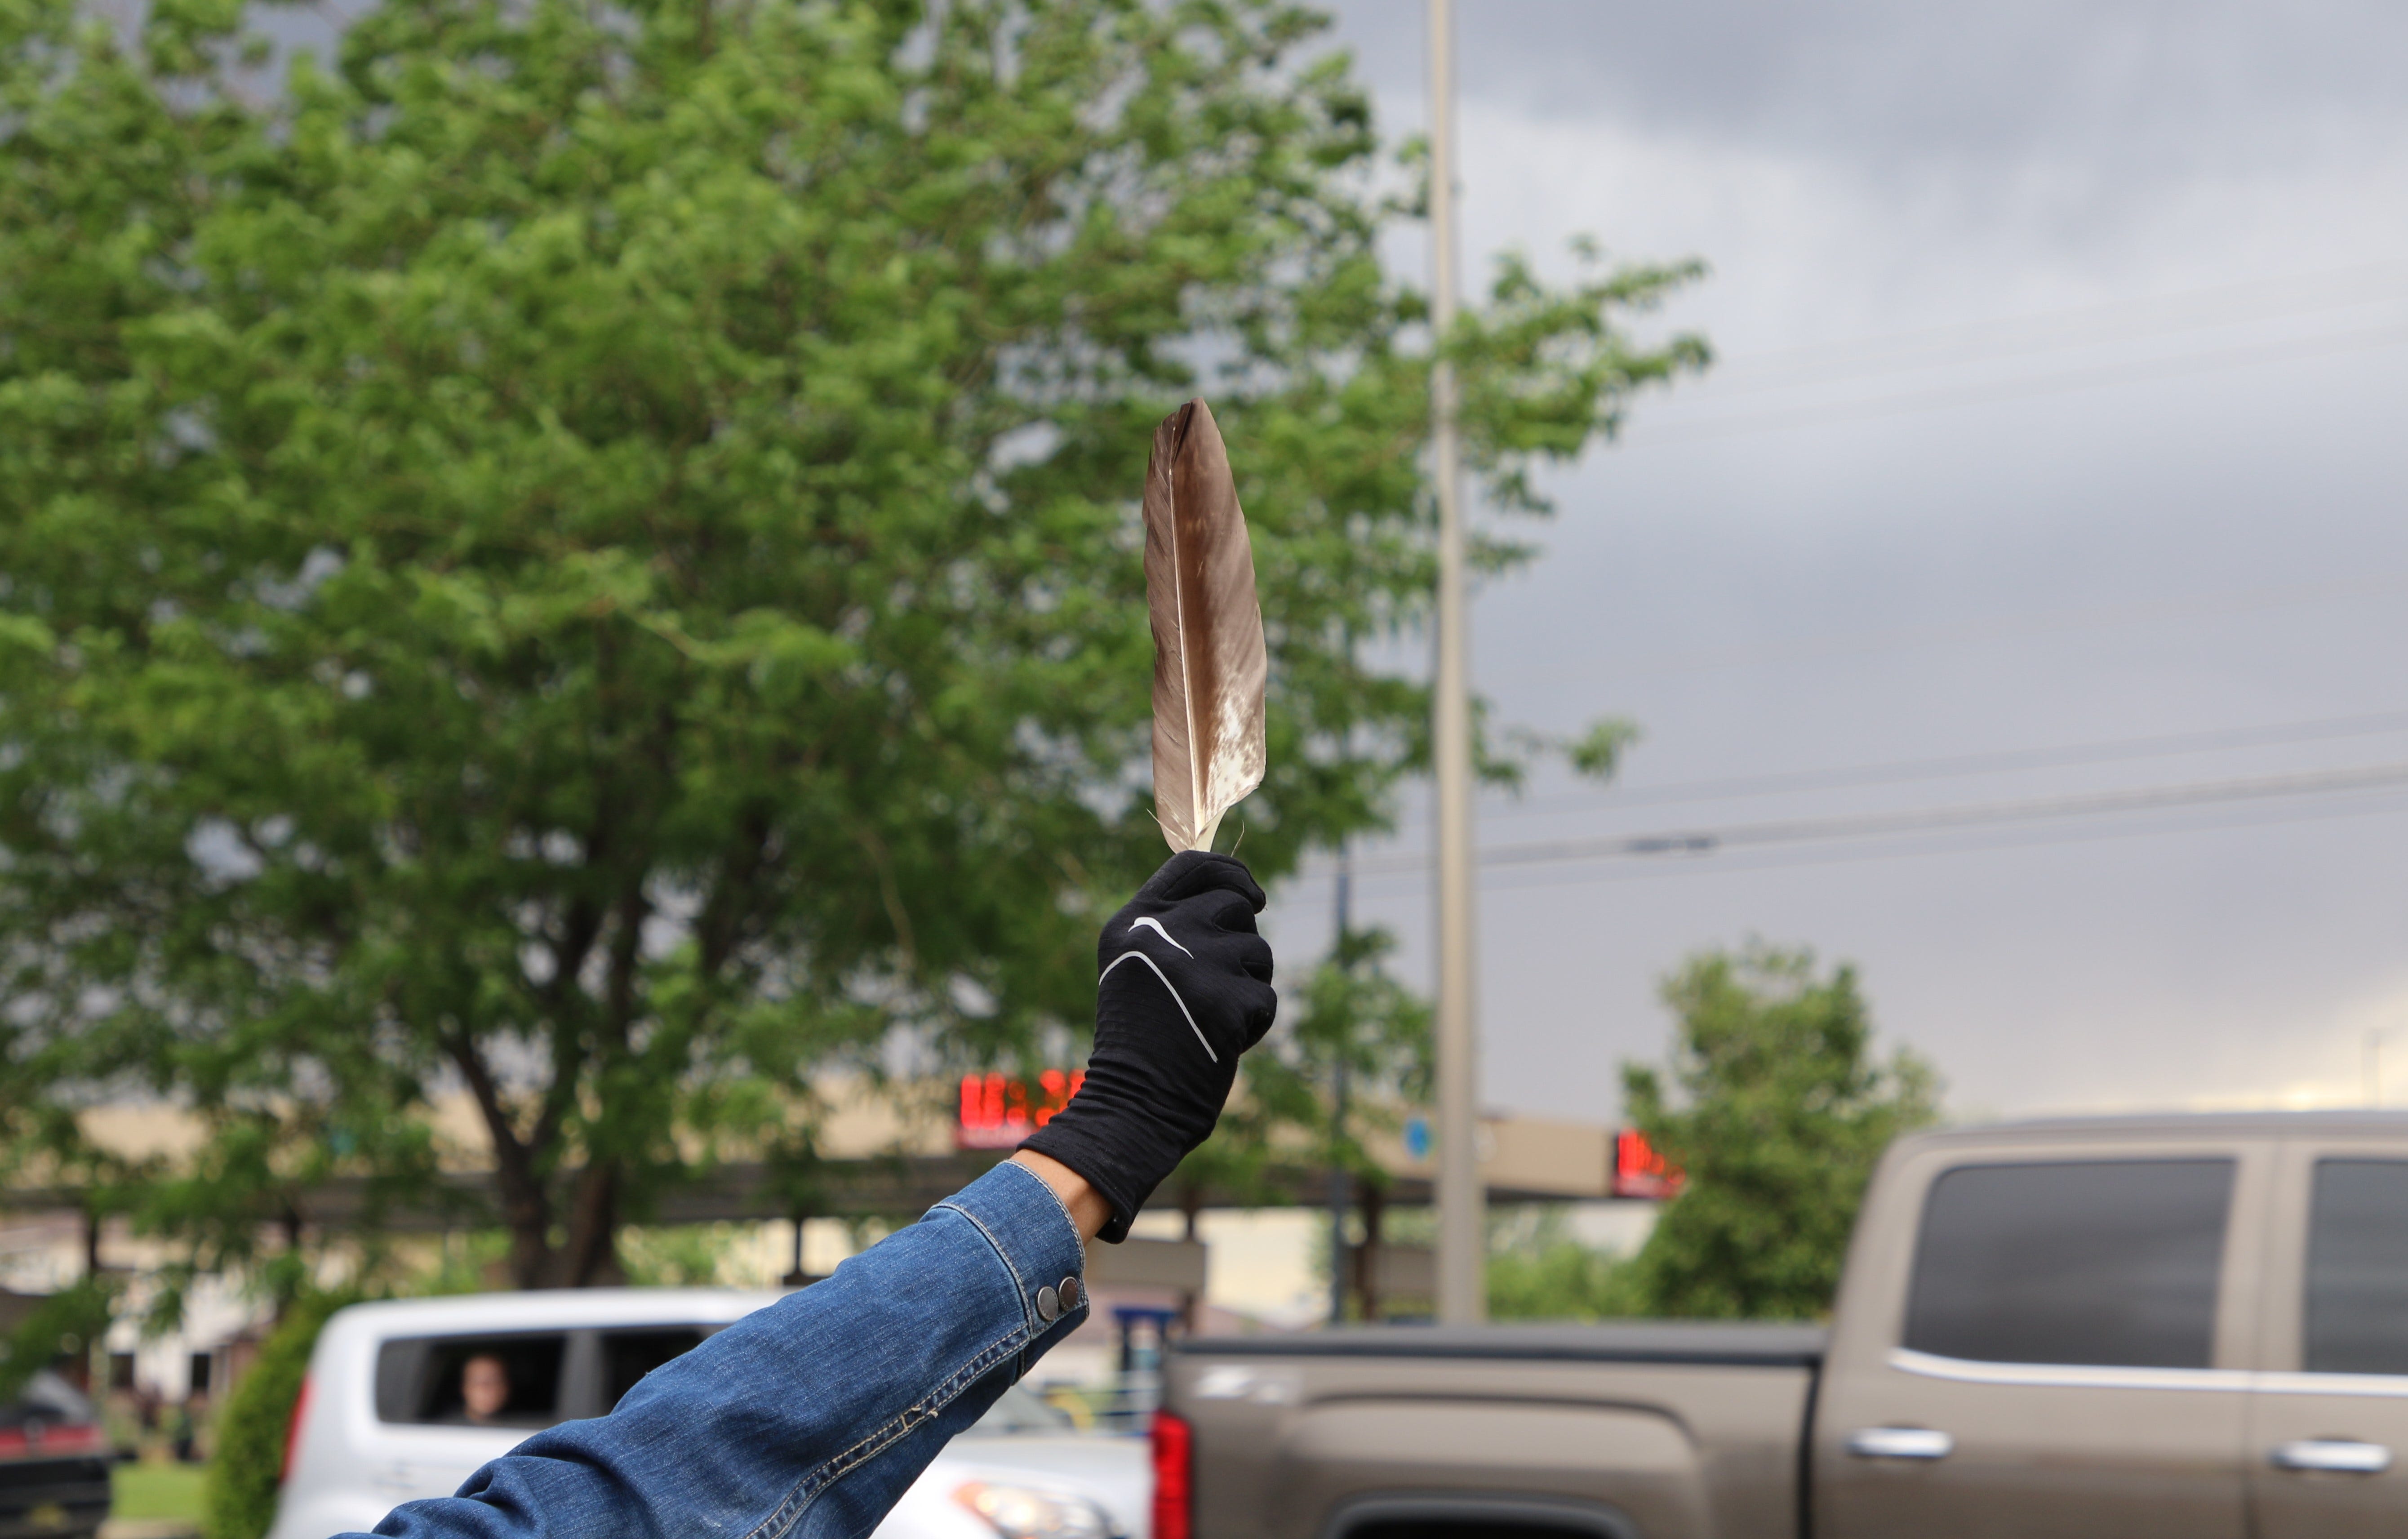 A protester holds an eagle feather on June 1 during the gathering that called for justice in George Floyd's deaths near the Animas Valley Mall in Farmington.